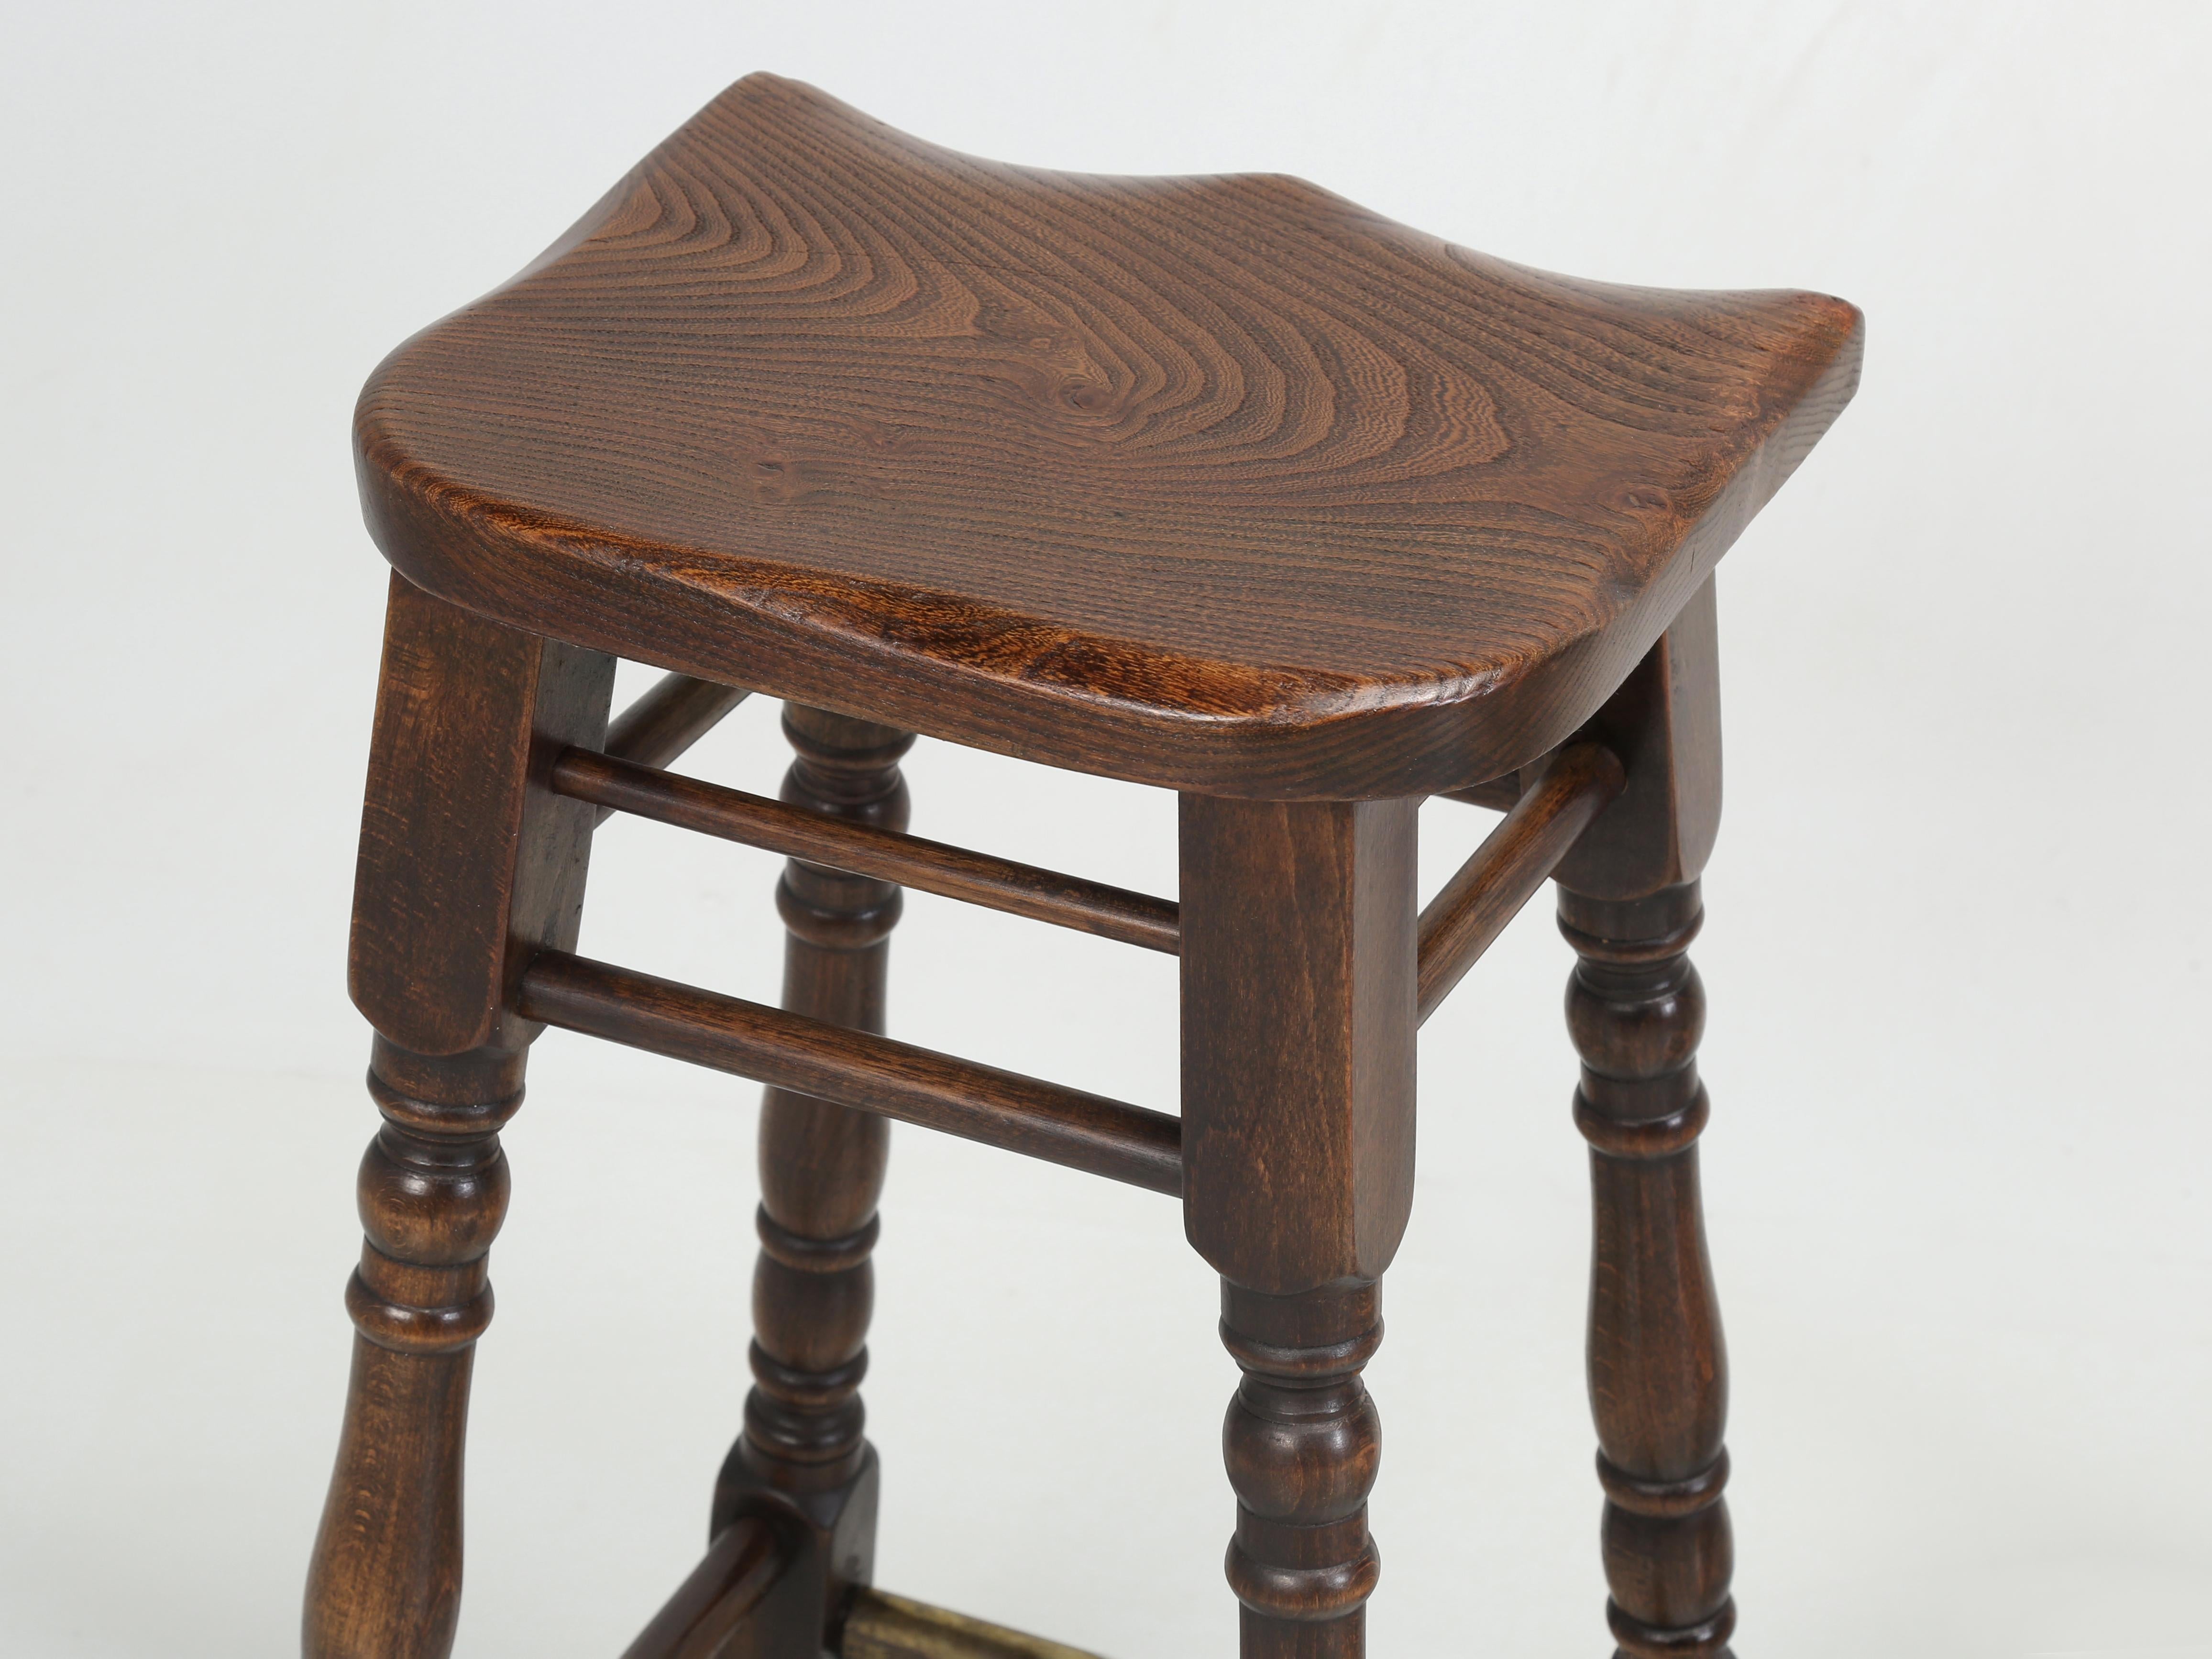 Country Pair of Irish Elm Wood Saddle Seat Stools Perfect for American Kitchen Counters